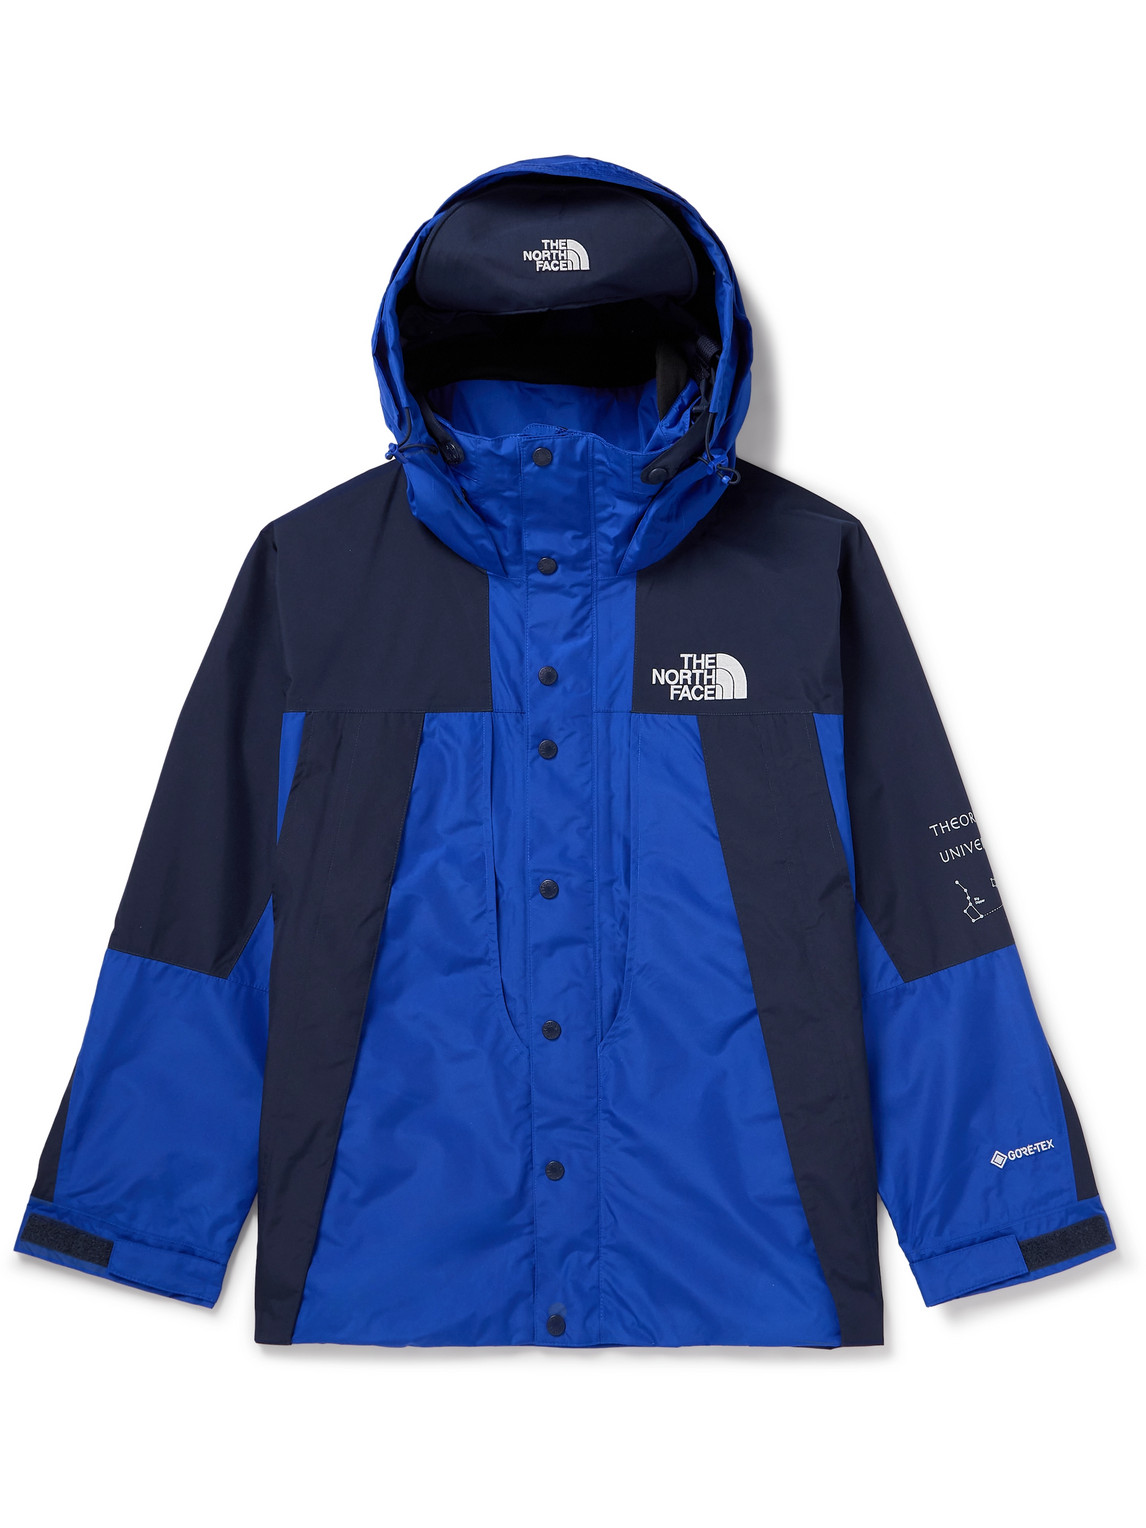 The North Face - Mountain Logo-Embroidered GORE-TEX® Hooded Jacket - Men - Blue - M von The North Face